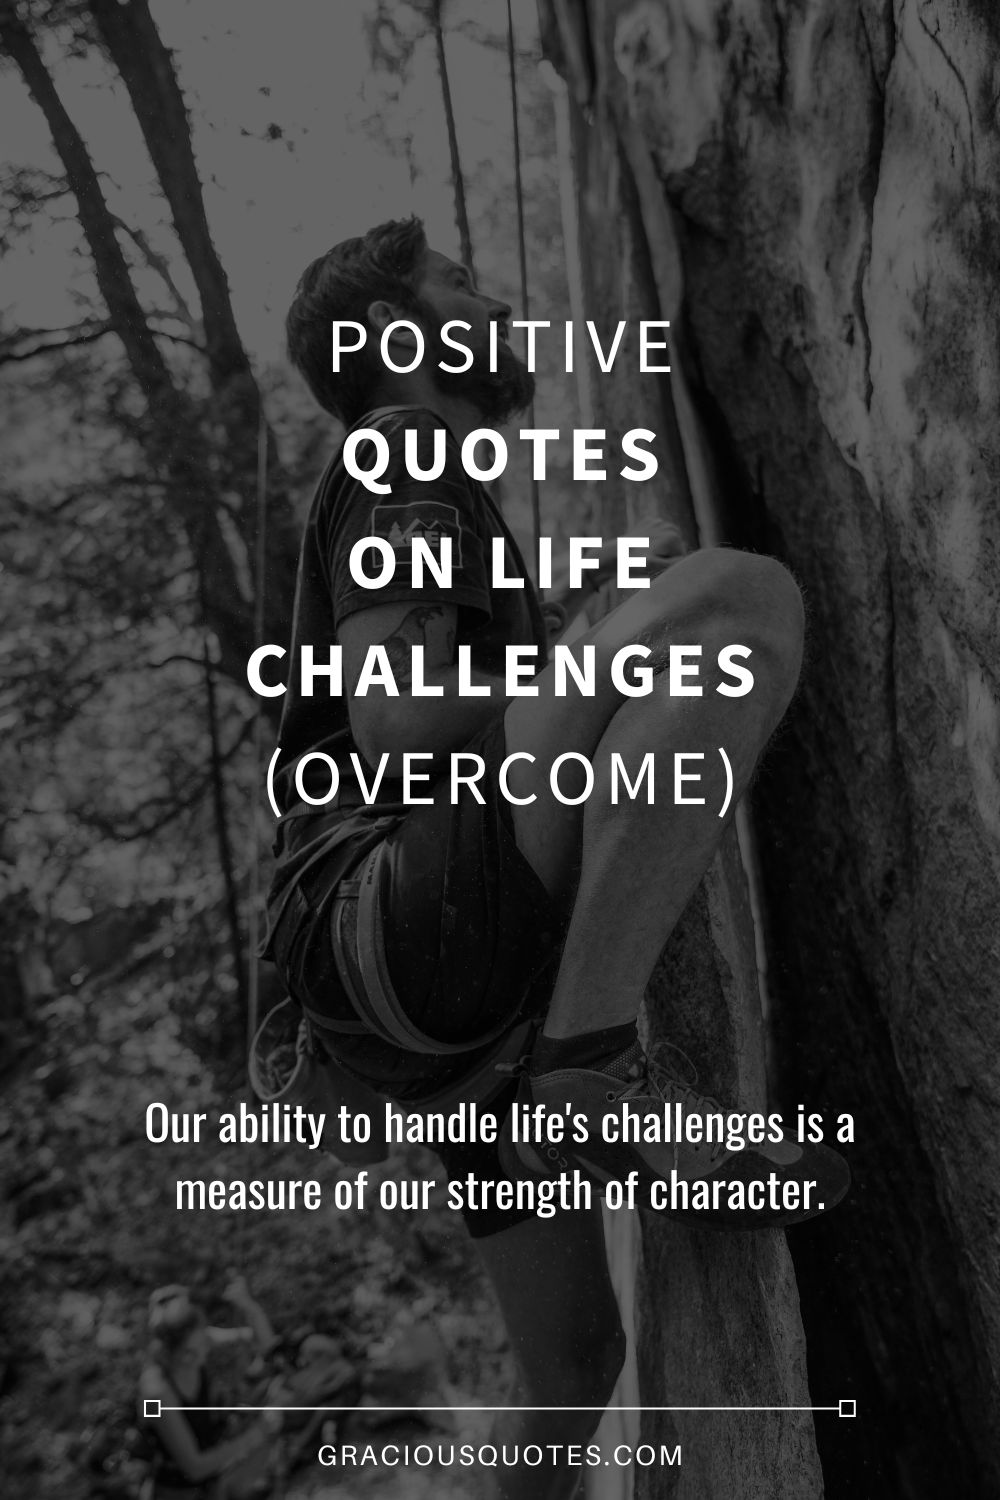 Positive Quotes on Life Challenges (OVERCOME) - Gracious Quotes